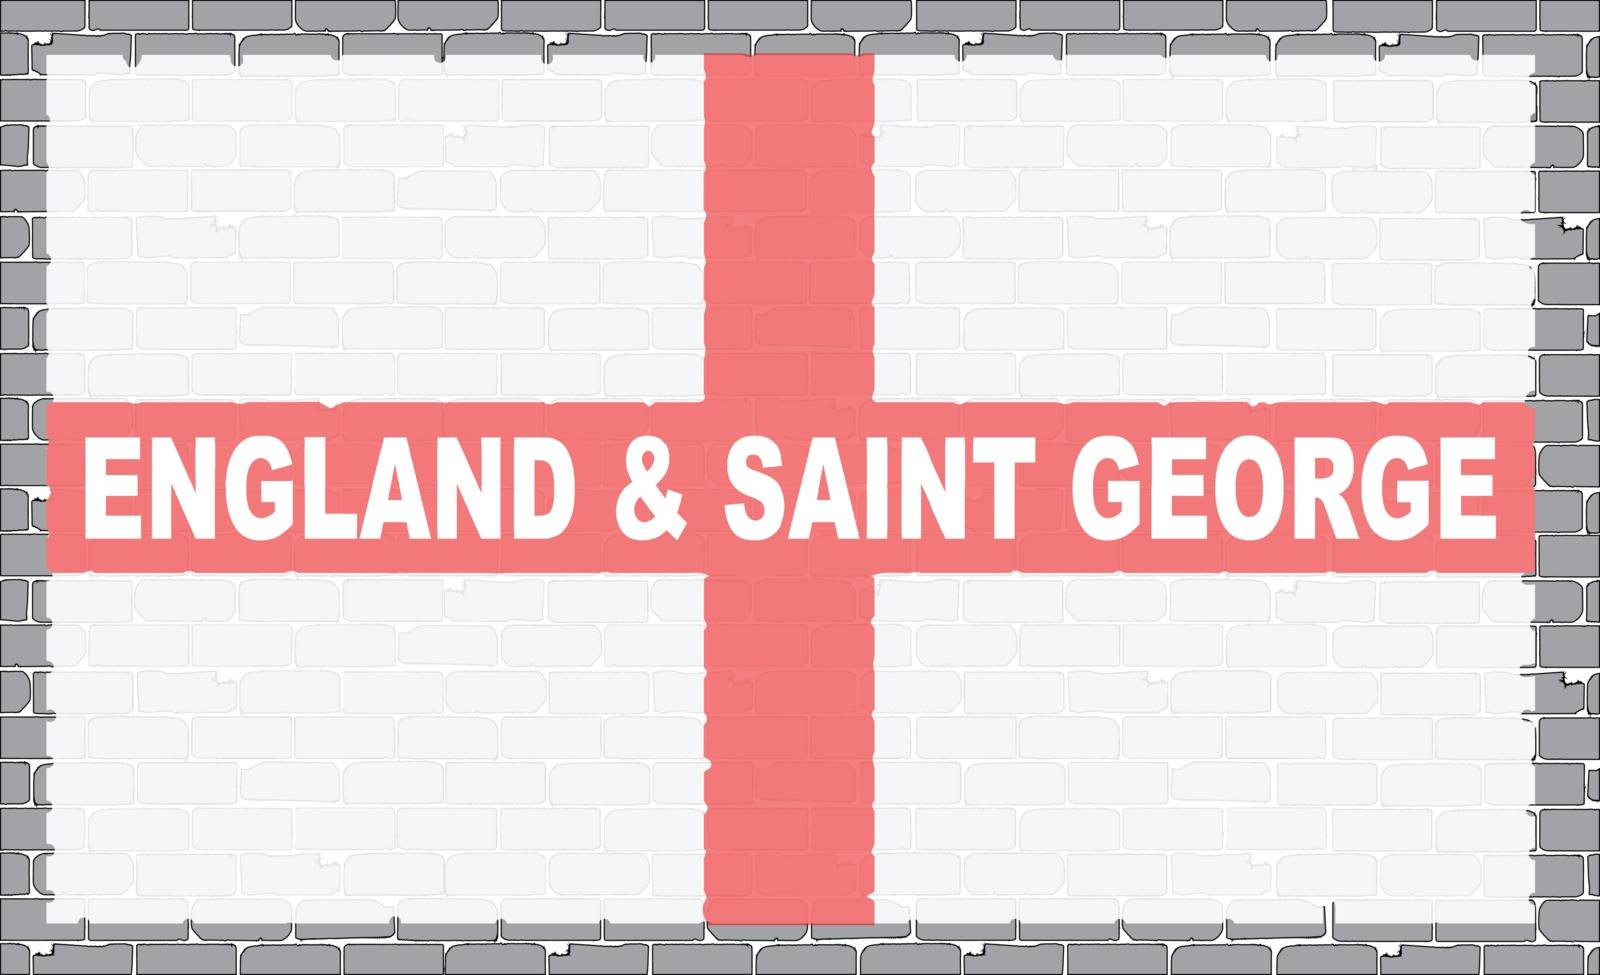 A section of brick wall as a background to the flag of Saint George of England